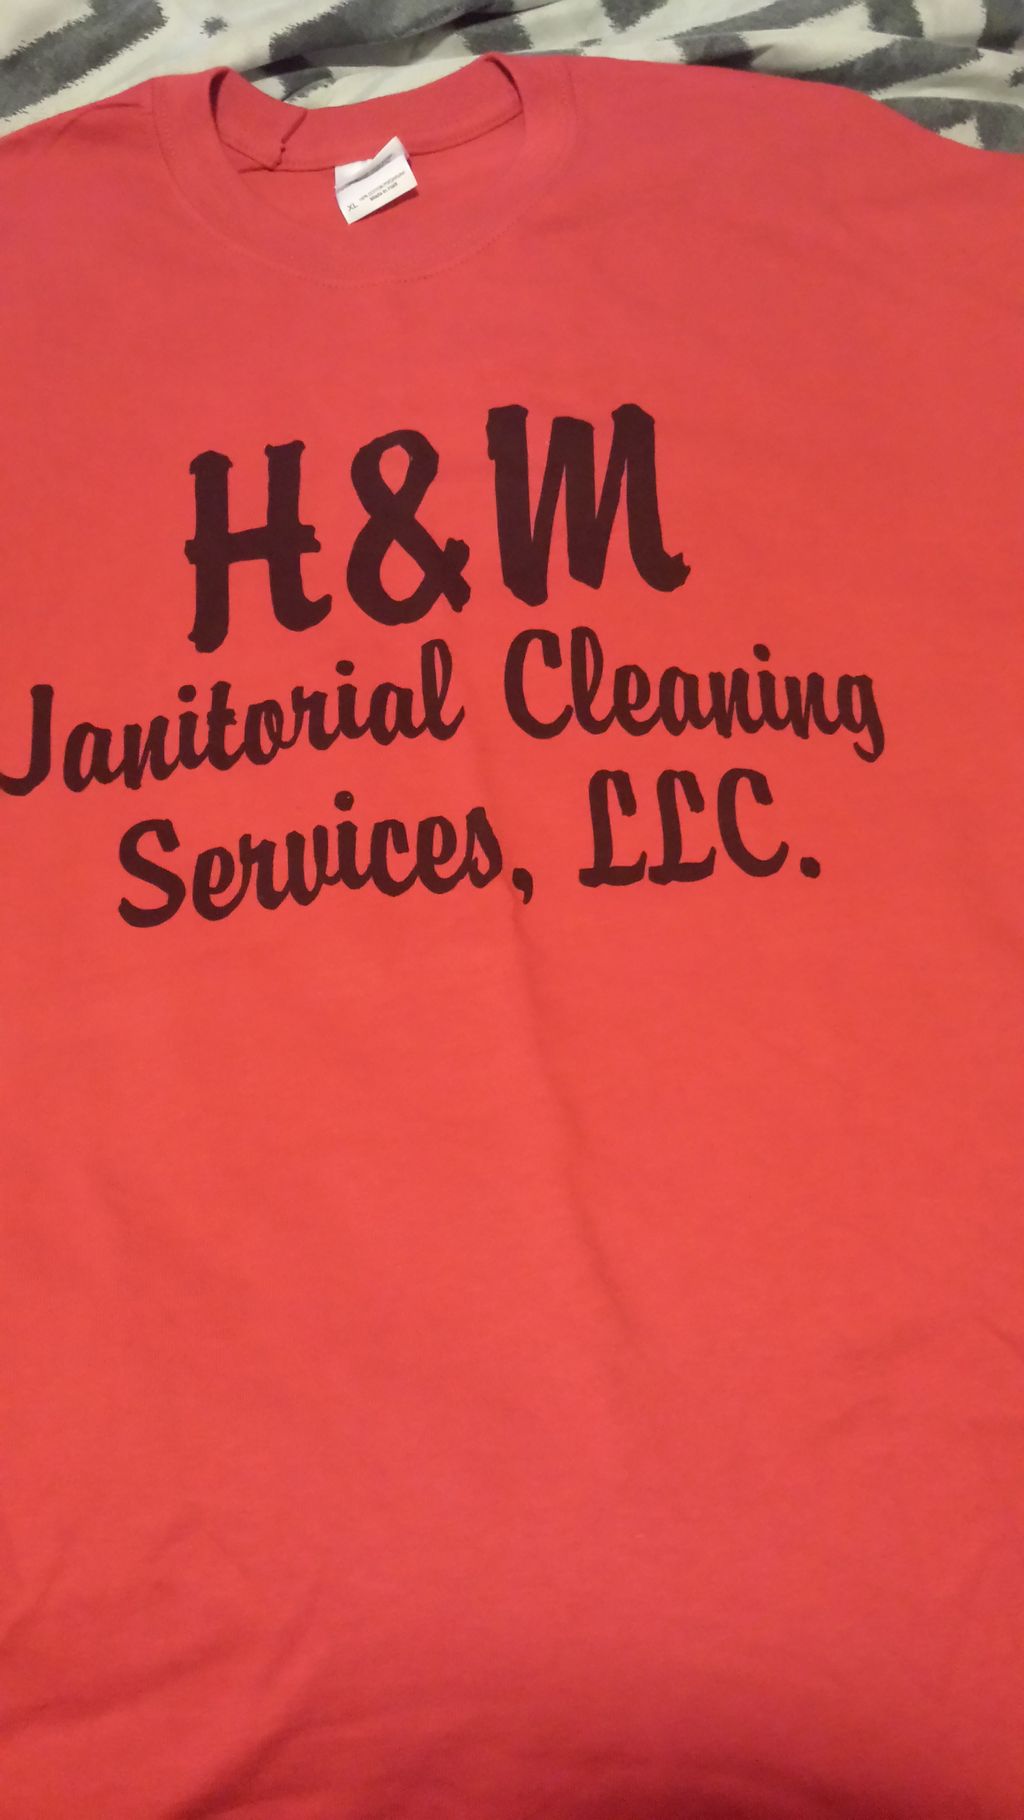 H&M Janitorial Services